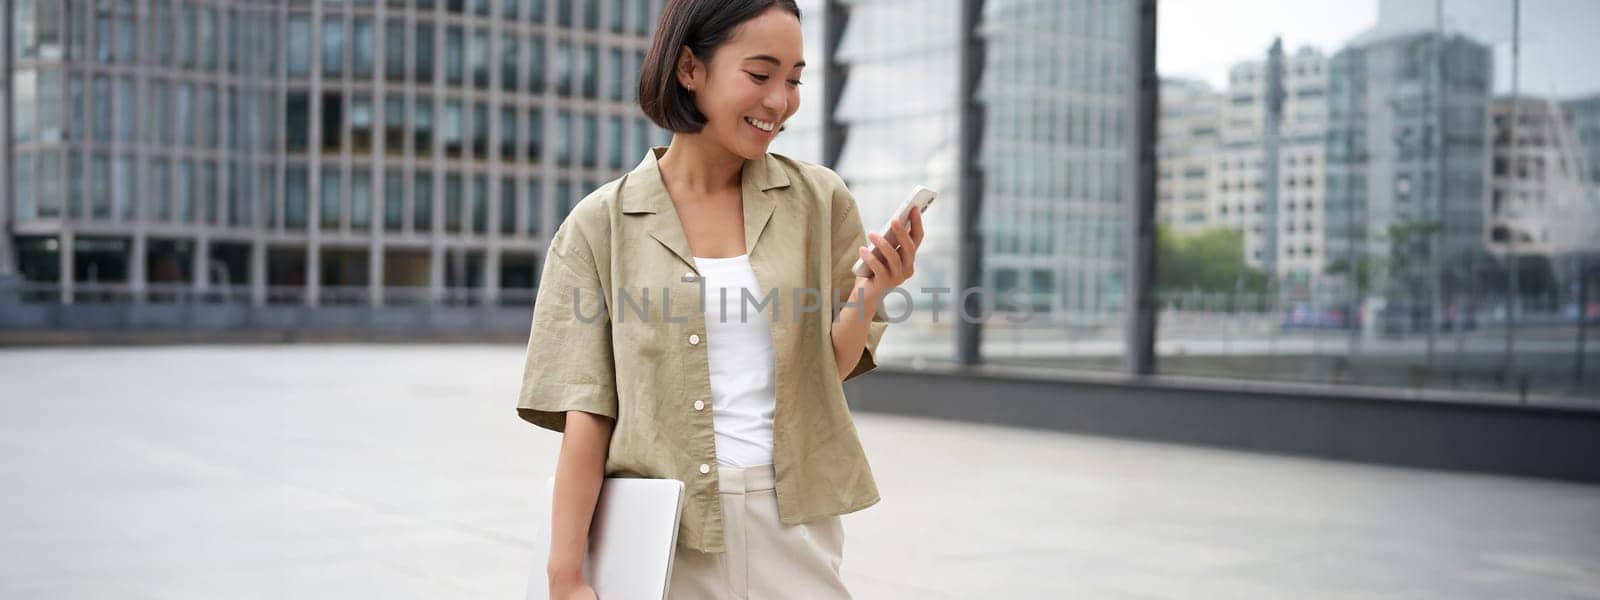 Young asian woman with laptop, walking on street and texting message, smiling while looking at smartphone.